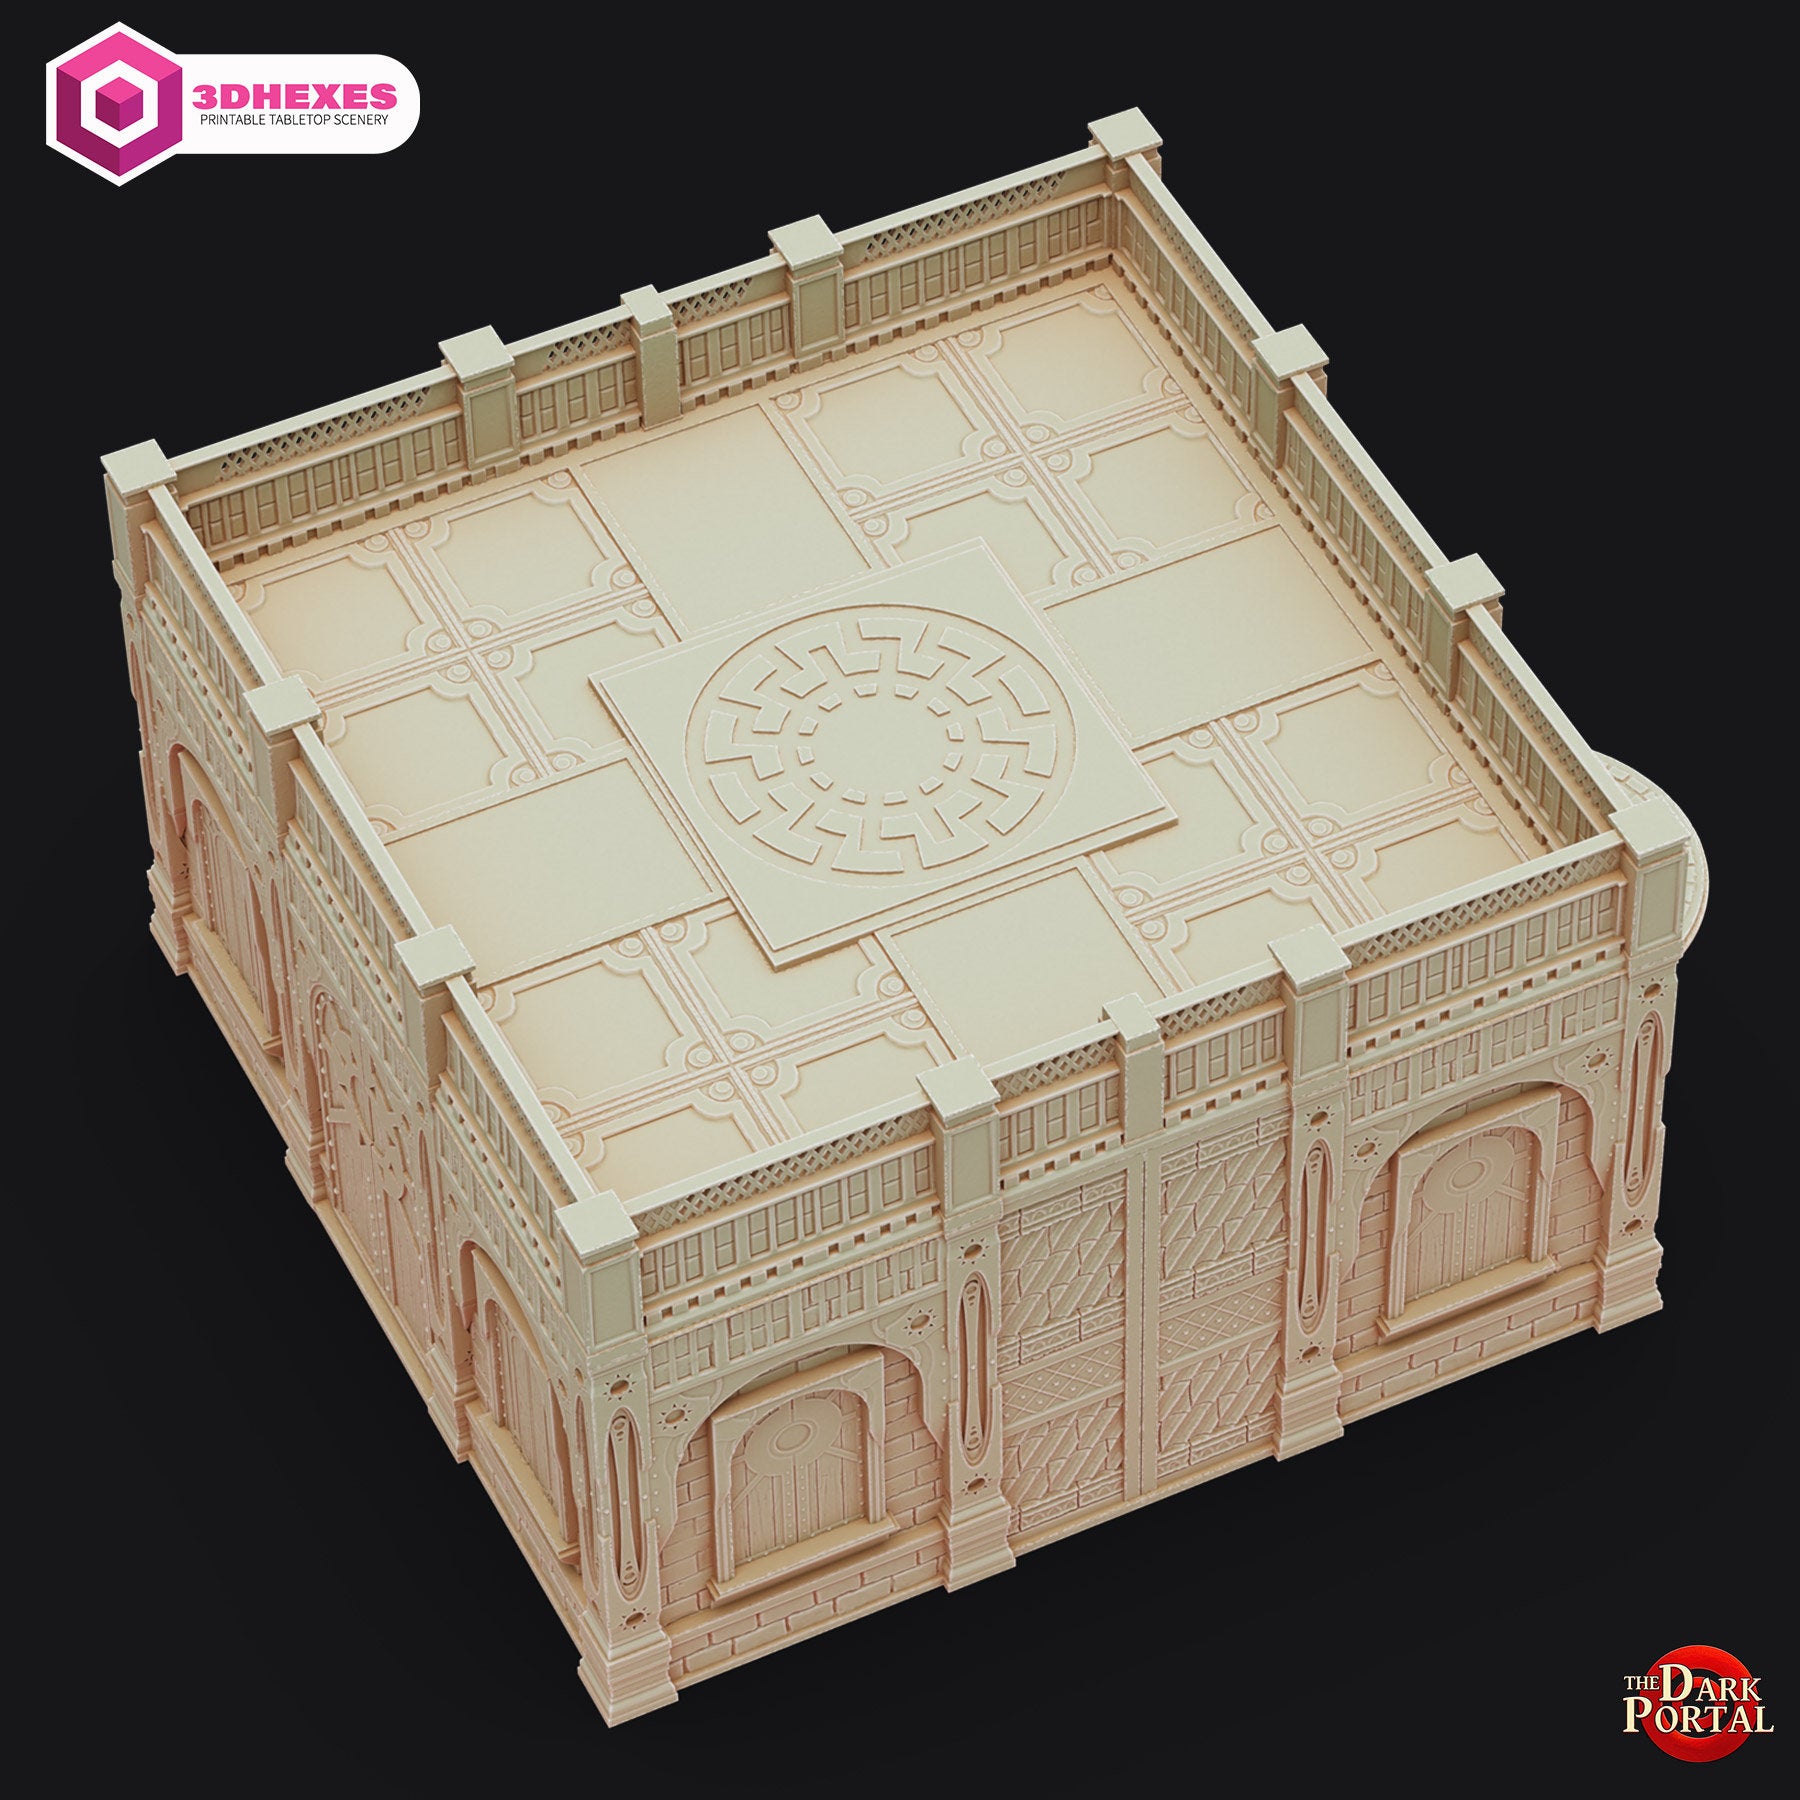 Completed Small House - Echoes of the Dark Portal by 3dHexes | Ancient Ruins Terrain for Roleplaying and Gaming | Building | Temple